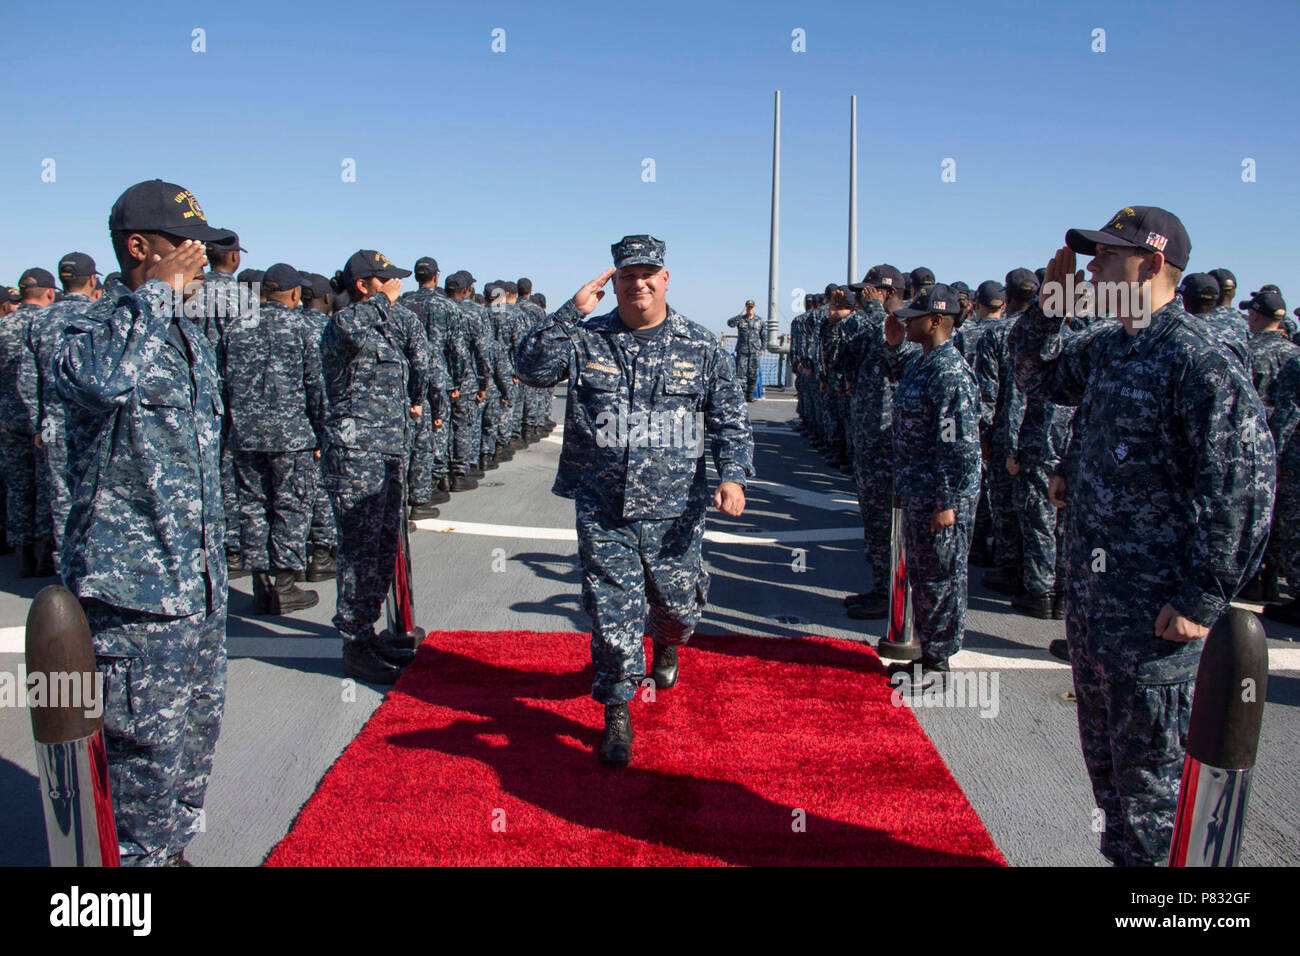 SEA (Nov 5, 2016) - Side boys render honors to Capt. Rich Dromerhauser, commodore, Destroyer Squadron 60, as he departs a change of command ceremony aboard USS Carney (DDG 64) Nov. 5, 2016. Carney, an Arleigh Burke-class guided-missile destroyer, forward-deployed to Rota, Spain, is conducting a routine patrol in the U.S. 6th fleet area of operations in support of U.S. national security interests in Europe. Stock Photo